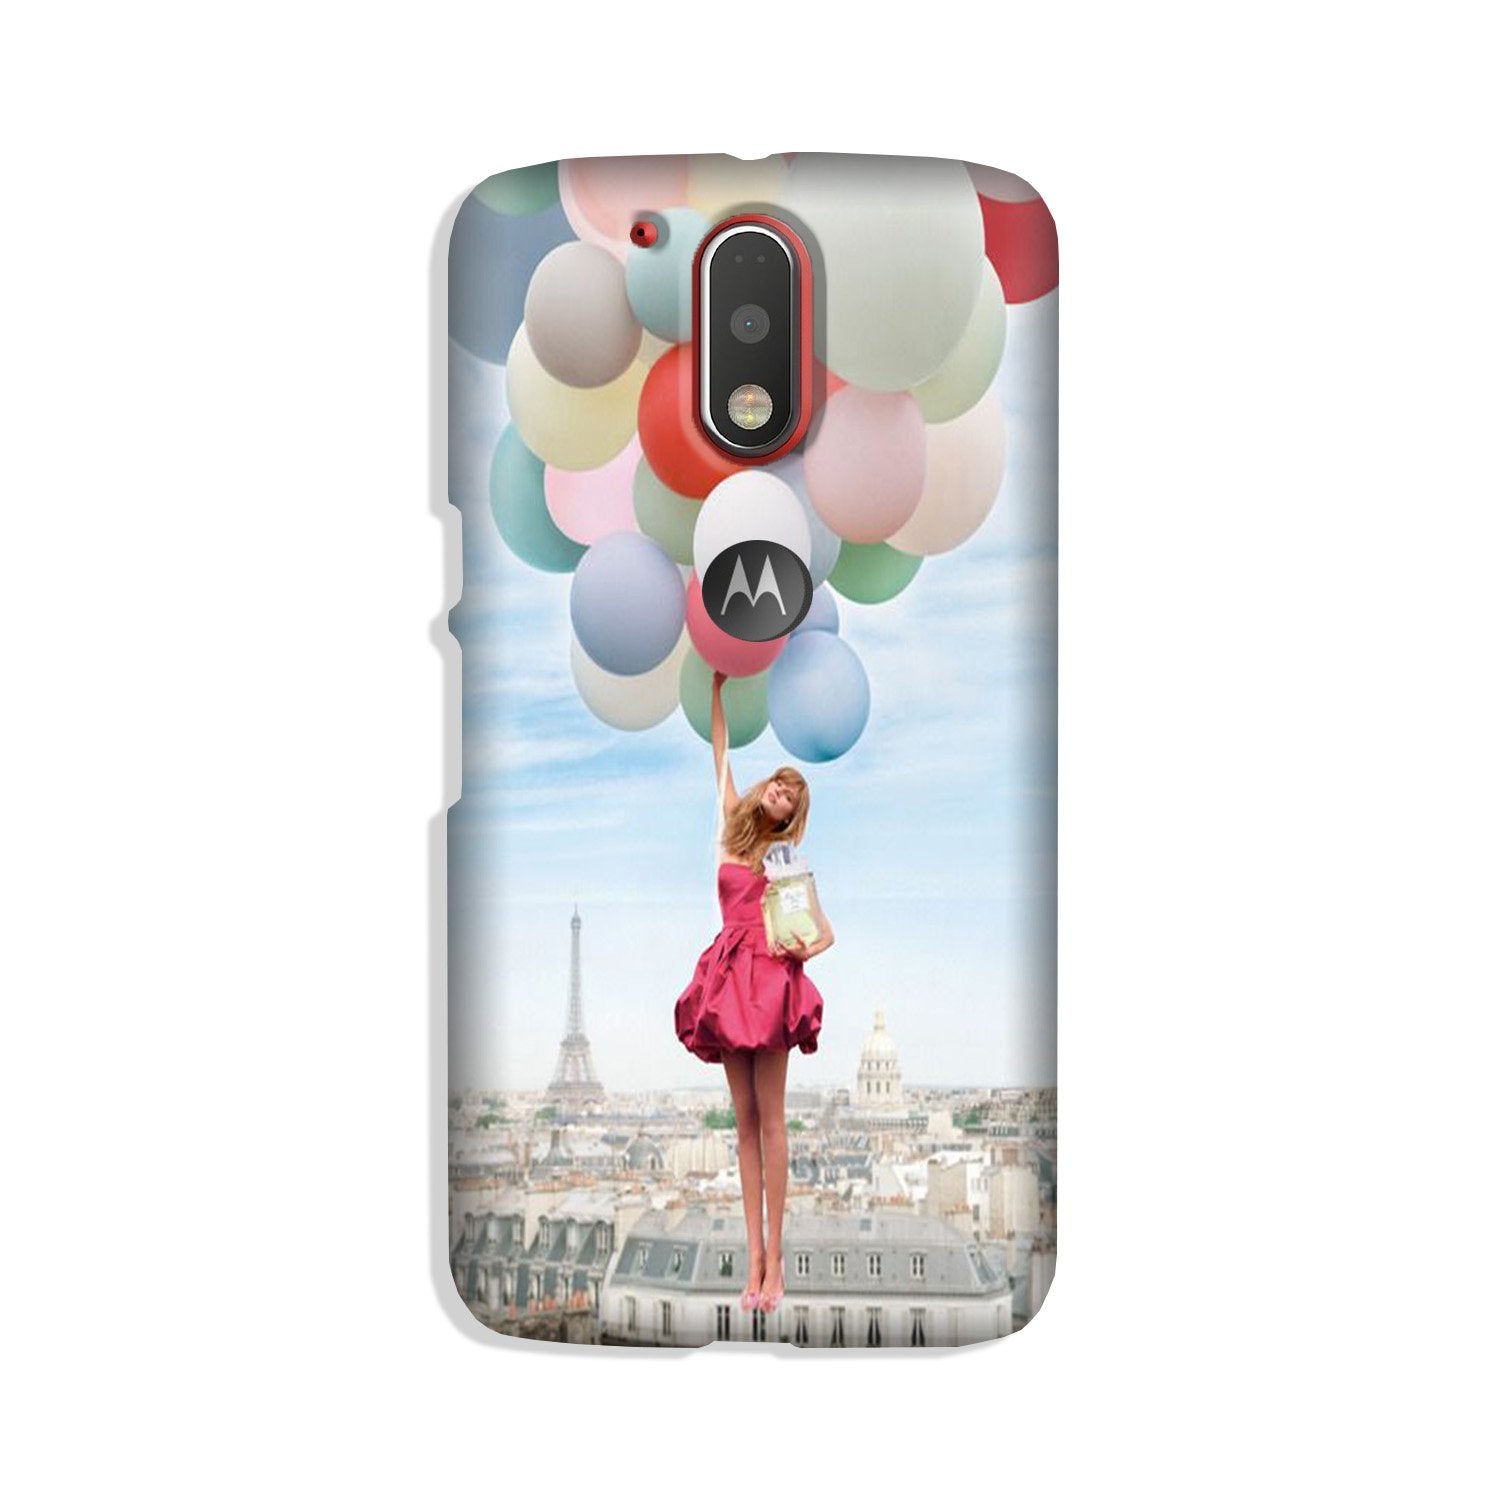 Girl with Baloon Case for Moto G4 Plus